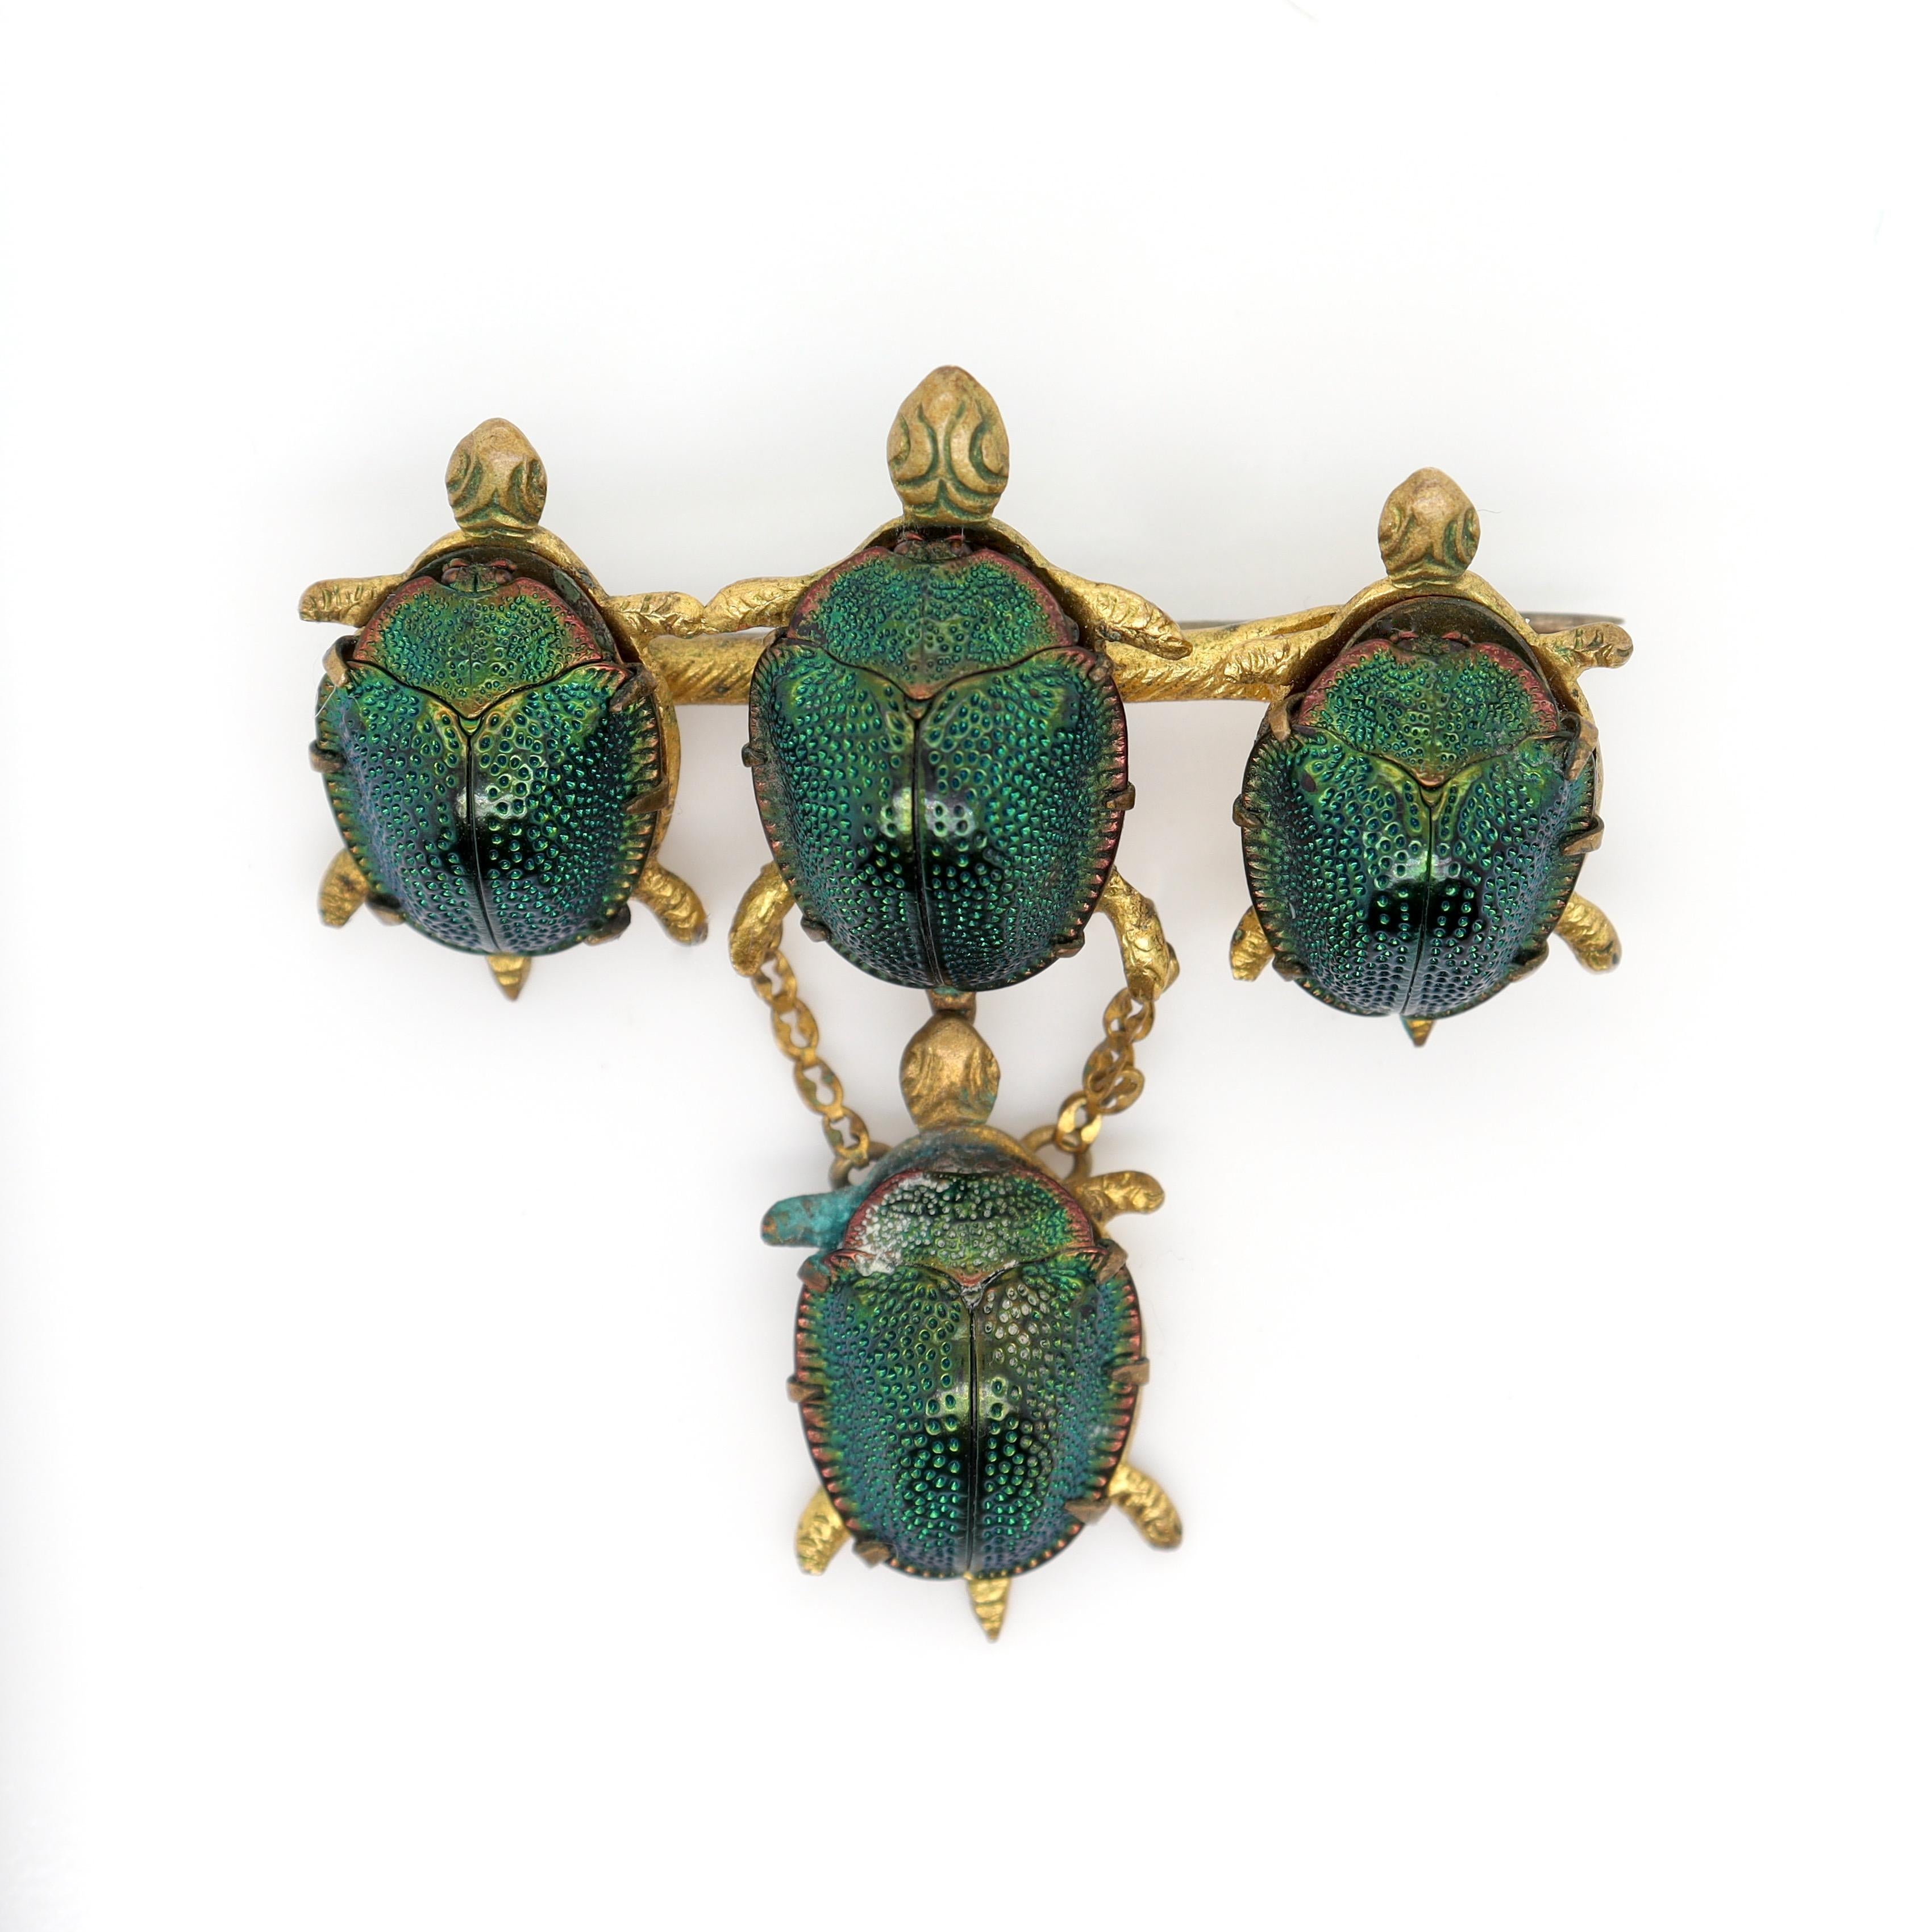 A fine antique Victorian gold filled brooch.

Consisting of 3 turtles mounted on a bar pin supporting a fourth suspended by 2 fine link chains.

Each turtle is set with a natural scarab beetle shell as its the turtle shell. 

Gold-filled and